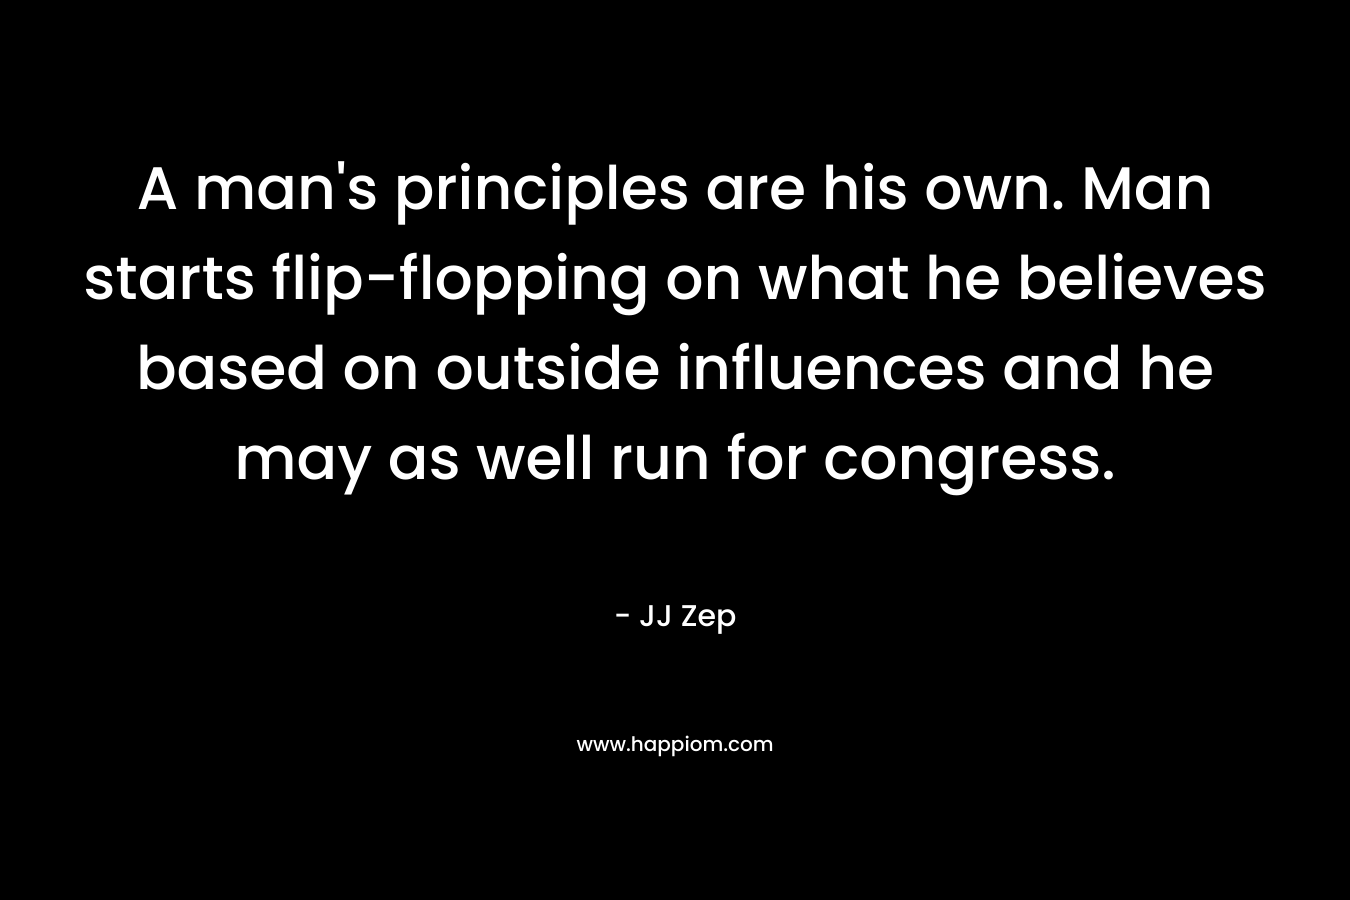 A man’s principles are his own. Man starts flip-flopping on what he believes based on outside influences and he may as well run for congress. – JJ Zep